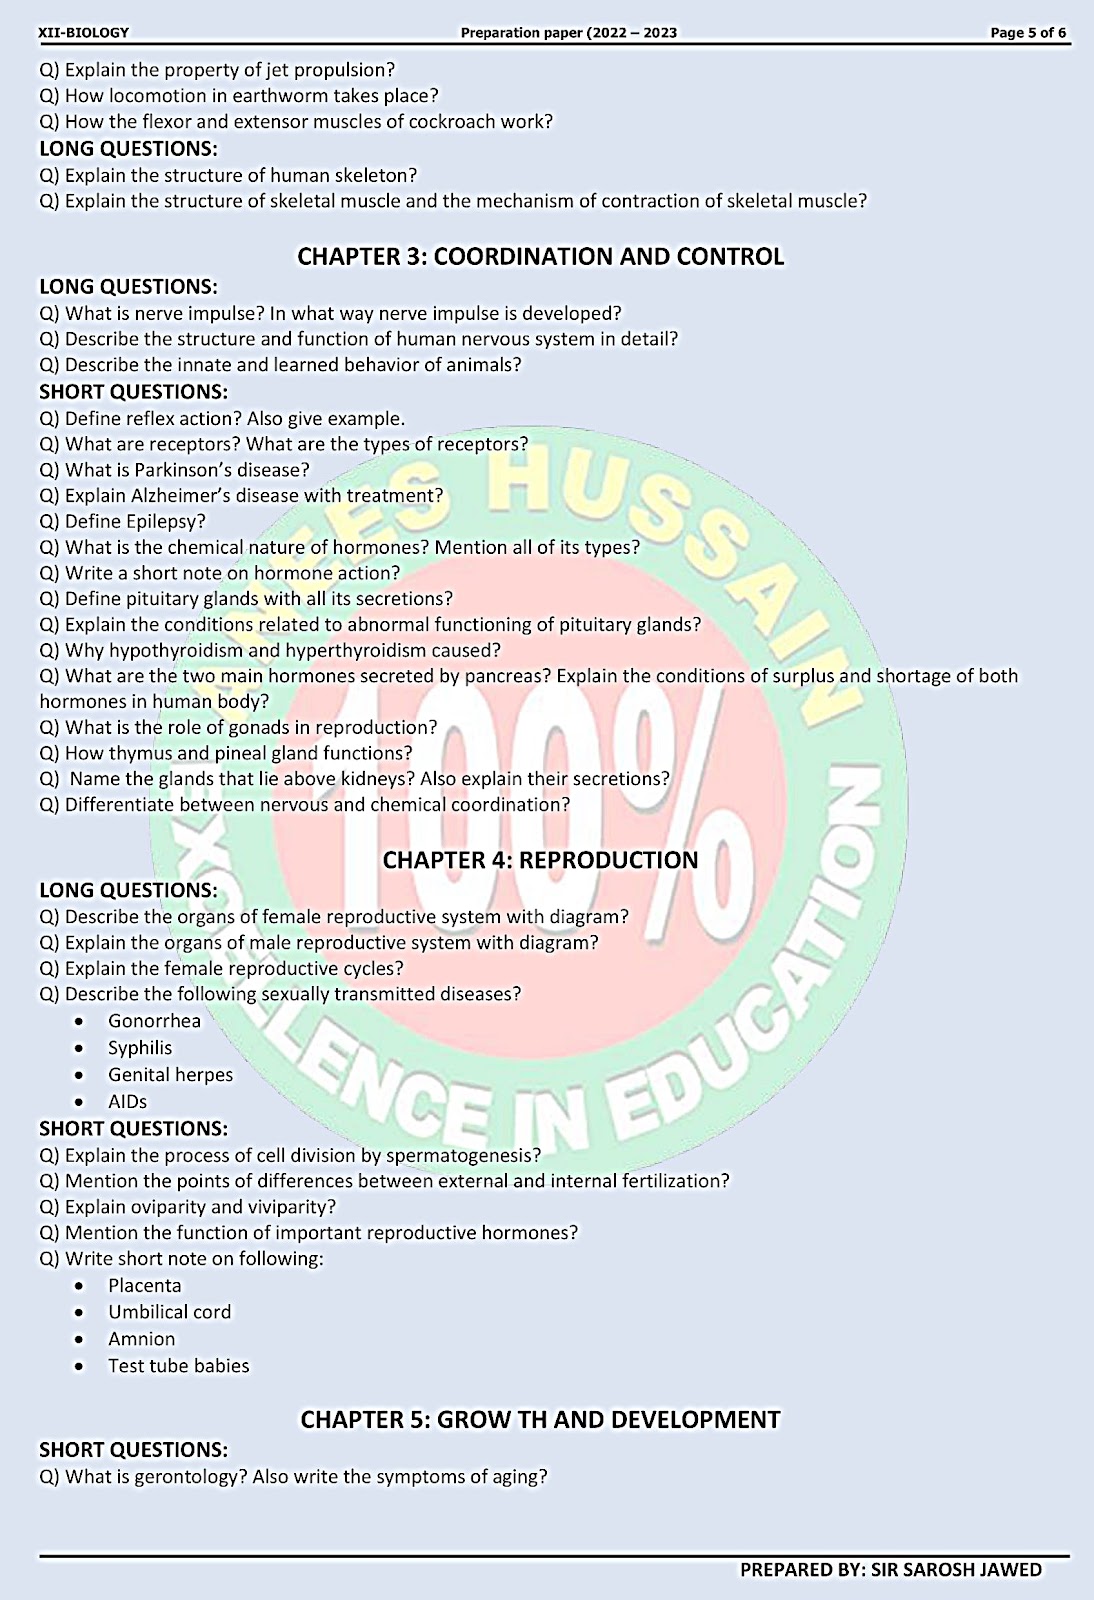 anees-hussain-preparation-papers-2023-for-class-9th-youtube